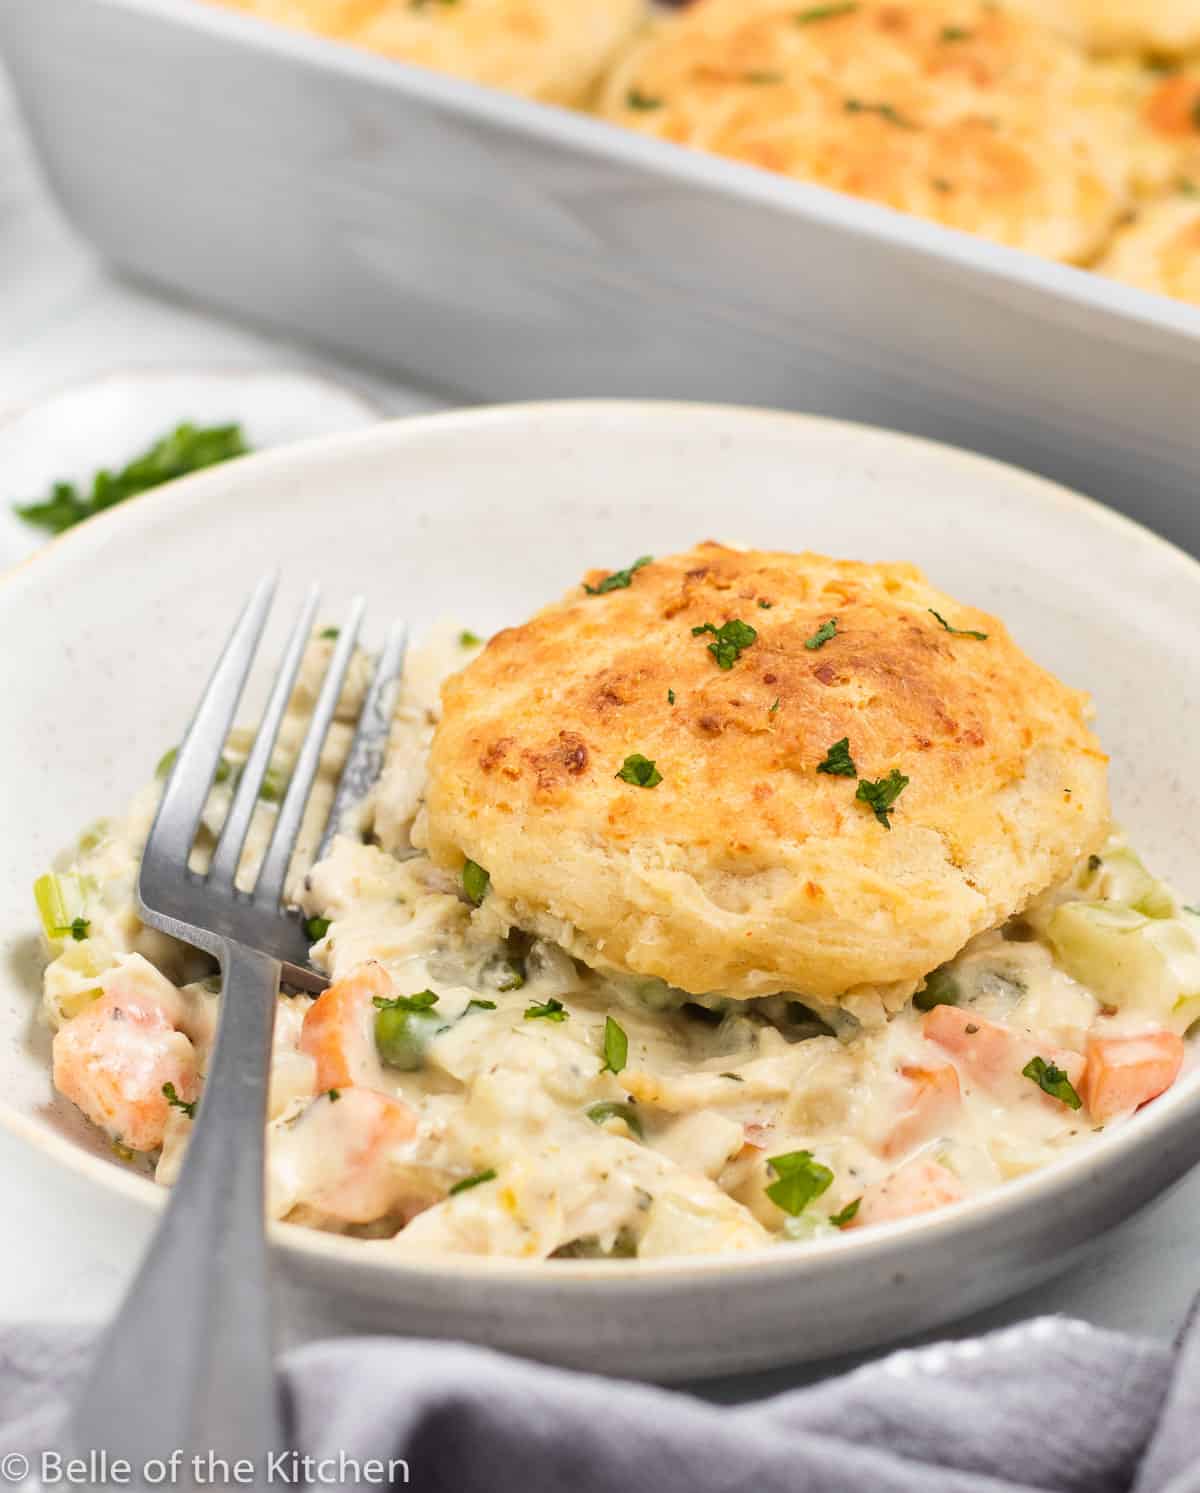 chicken and vegetables in a bowl topped with a biscuit and fork.